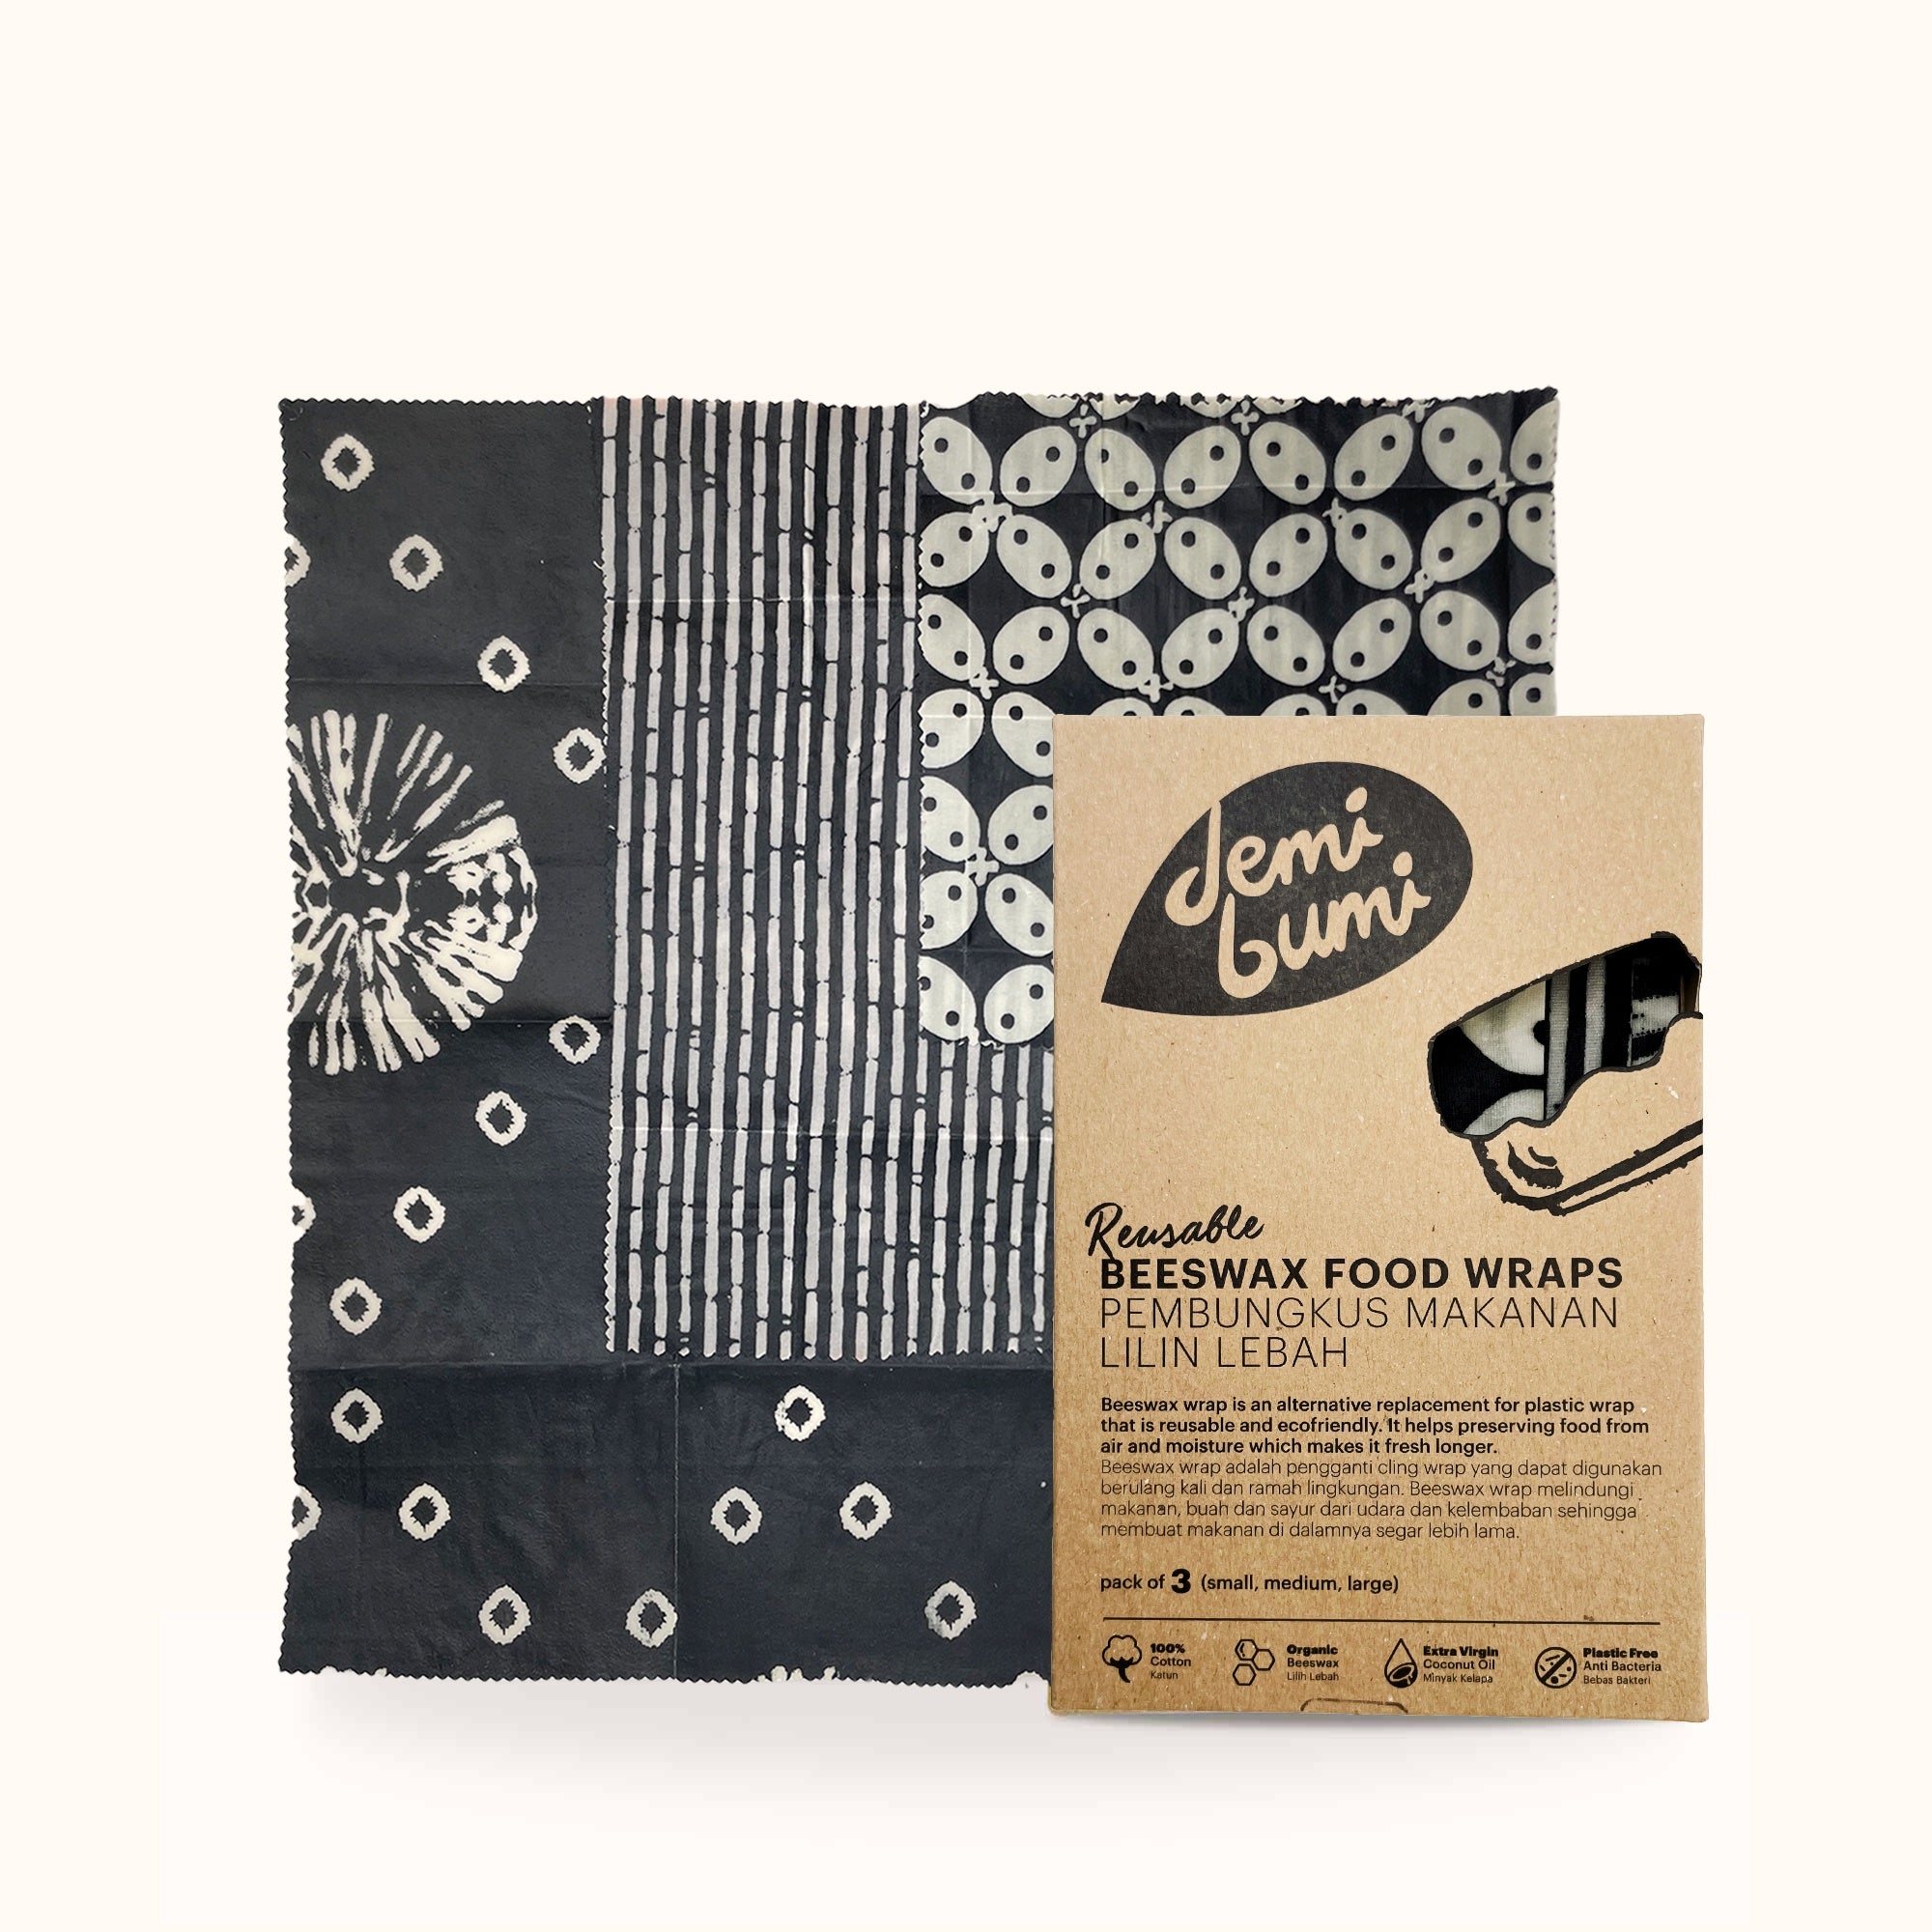 Demibumi Beeswax Food Wrap | Buy at The Green Collective